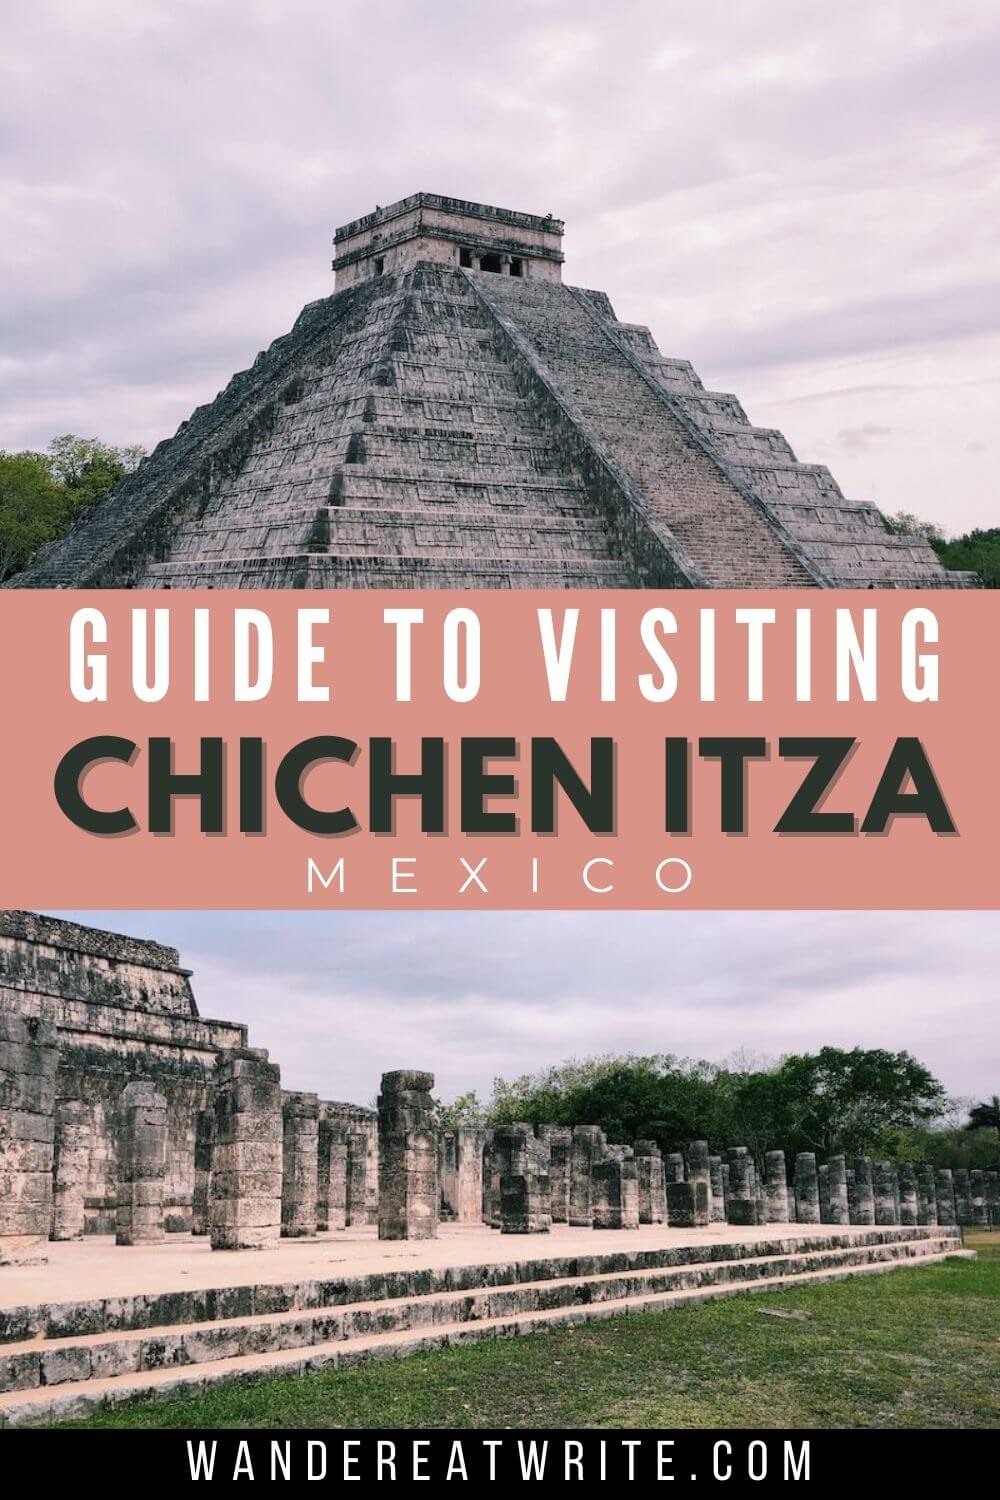 Guide to visiting chichen itza on your own